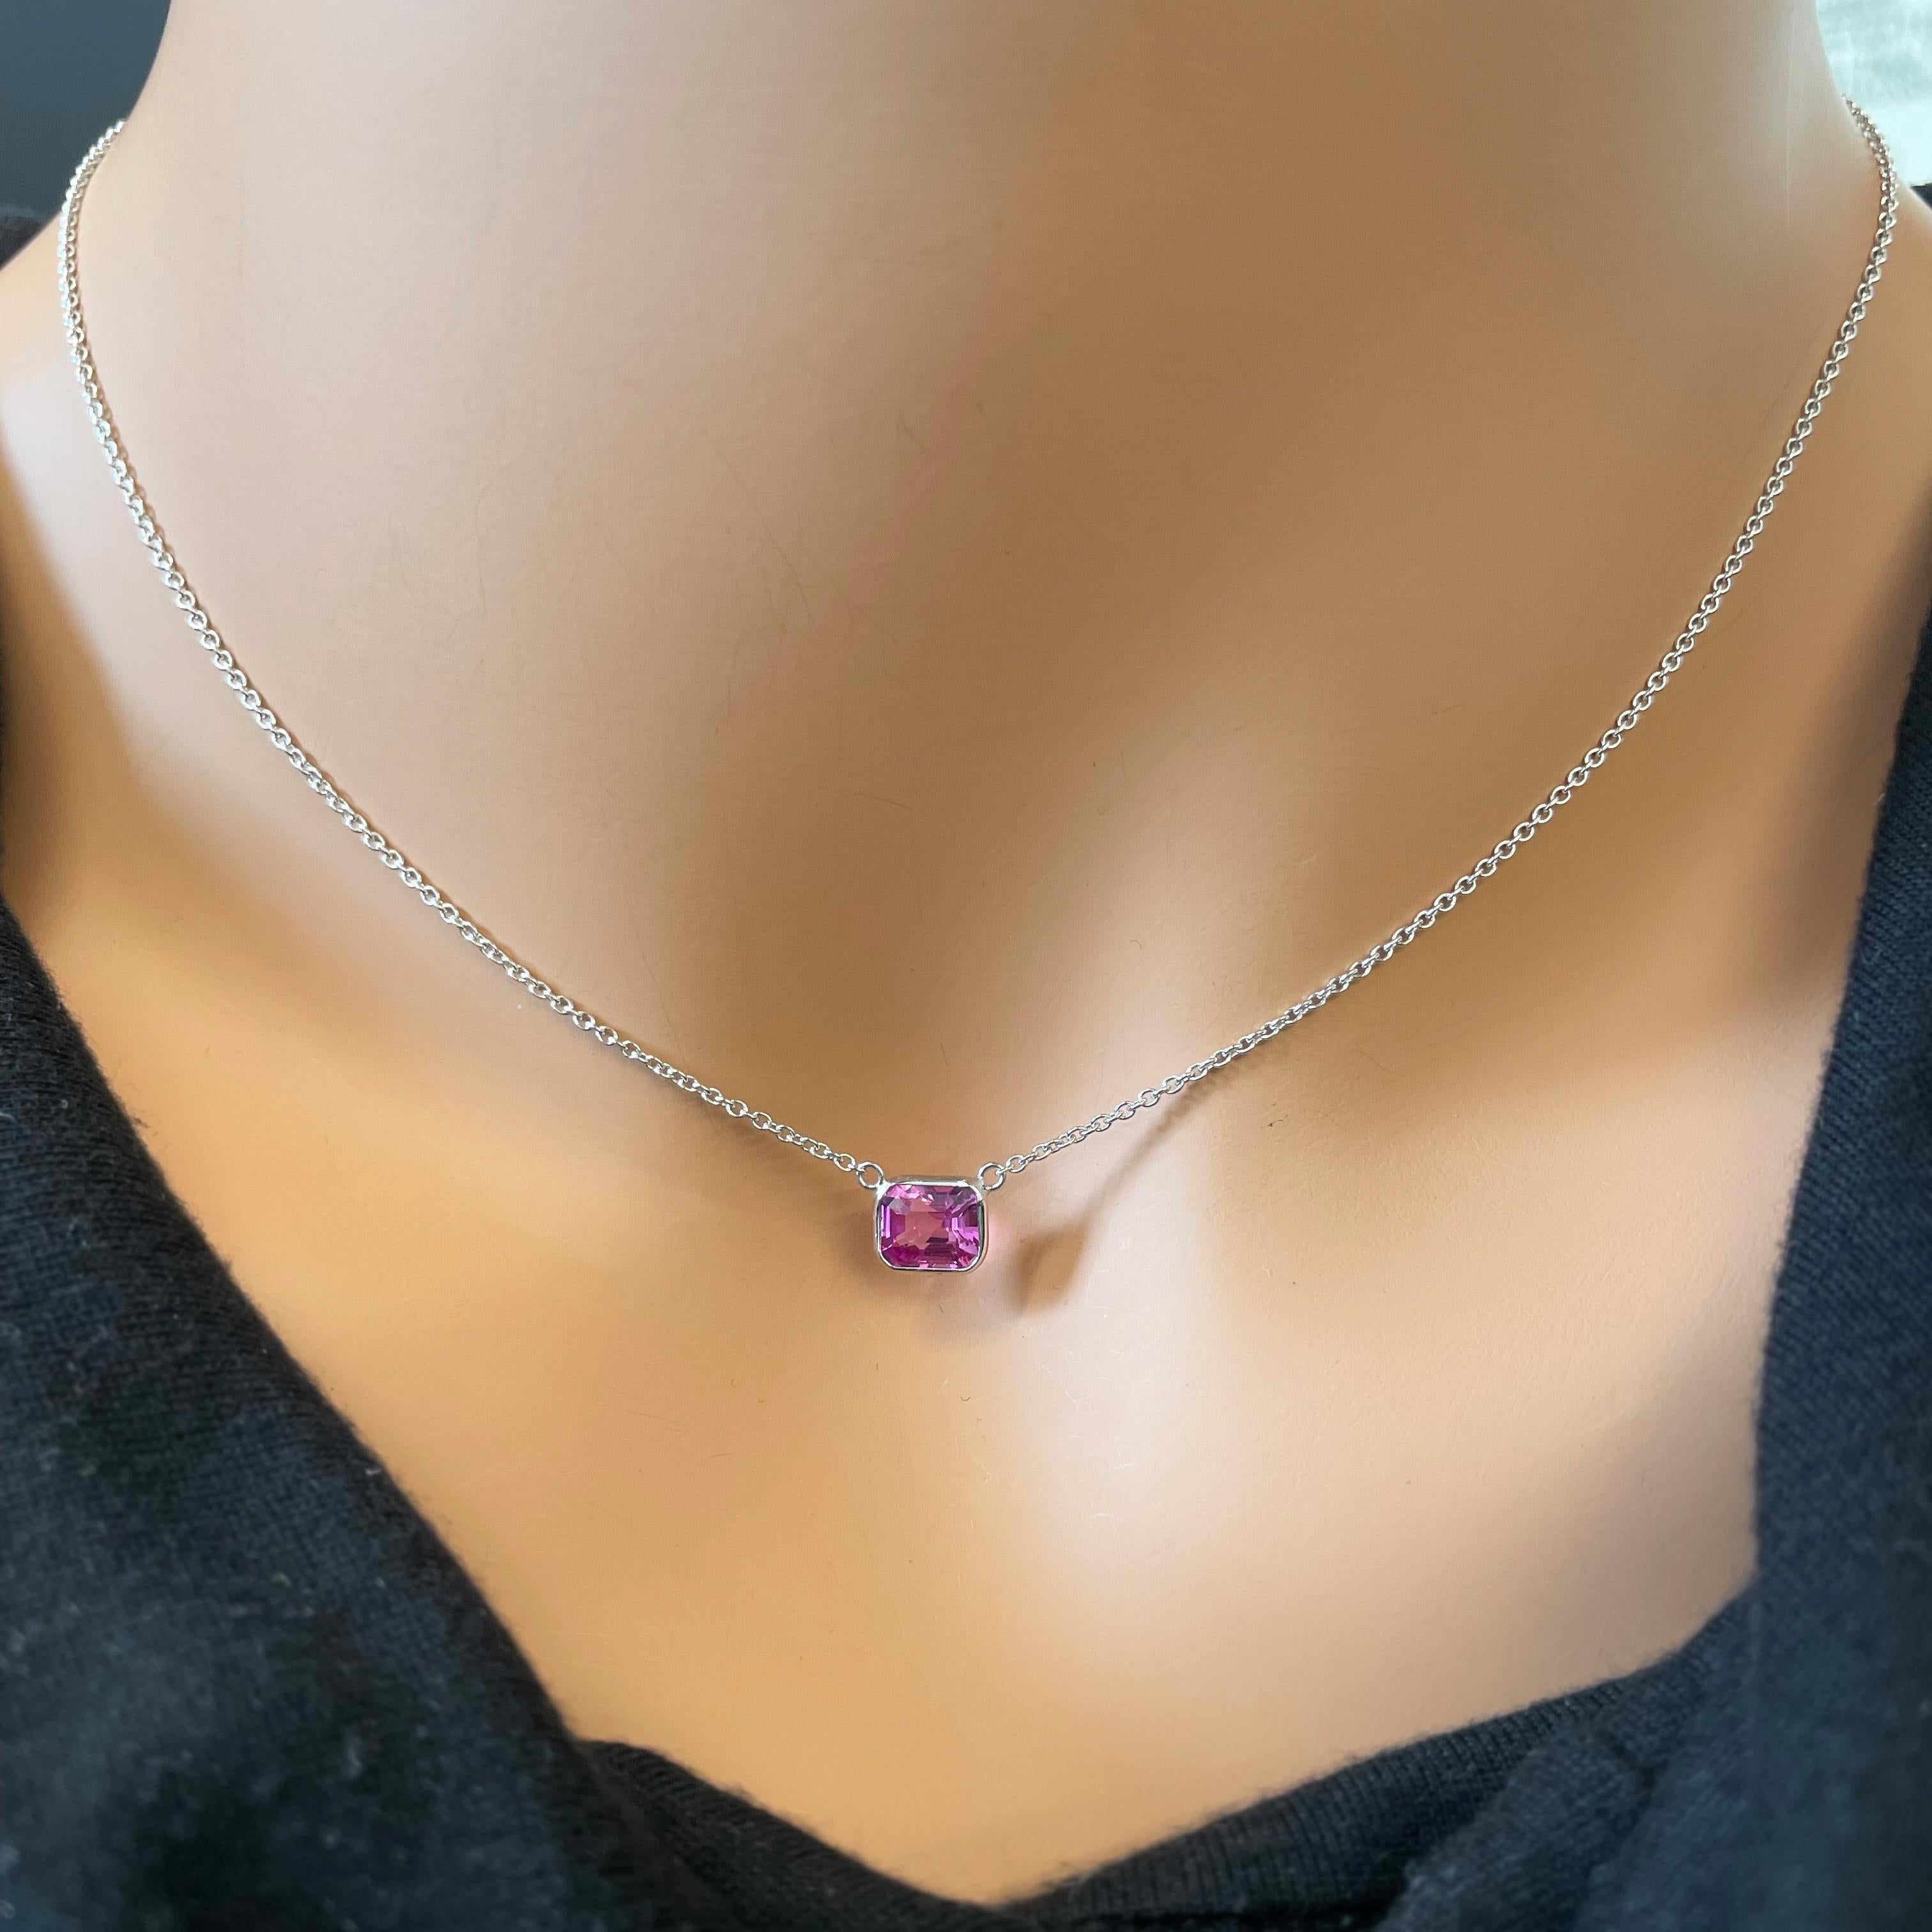 1.60 Carat Emerald Cut Pink Sapphire Fashion Necklaces In 14K White Gold   In New Condition For Sale In Chicago, IL